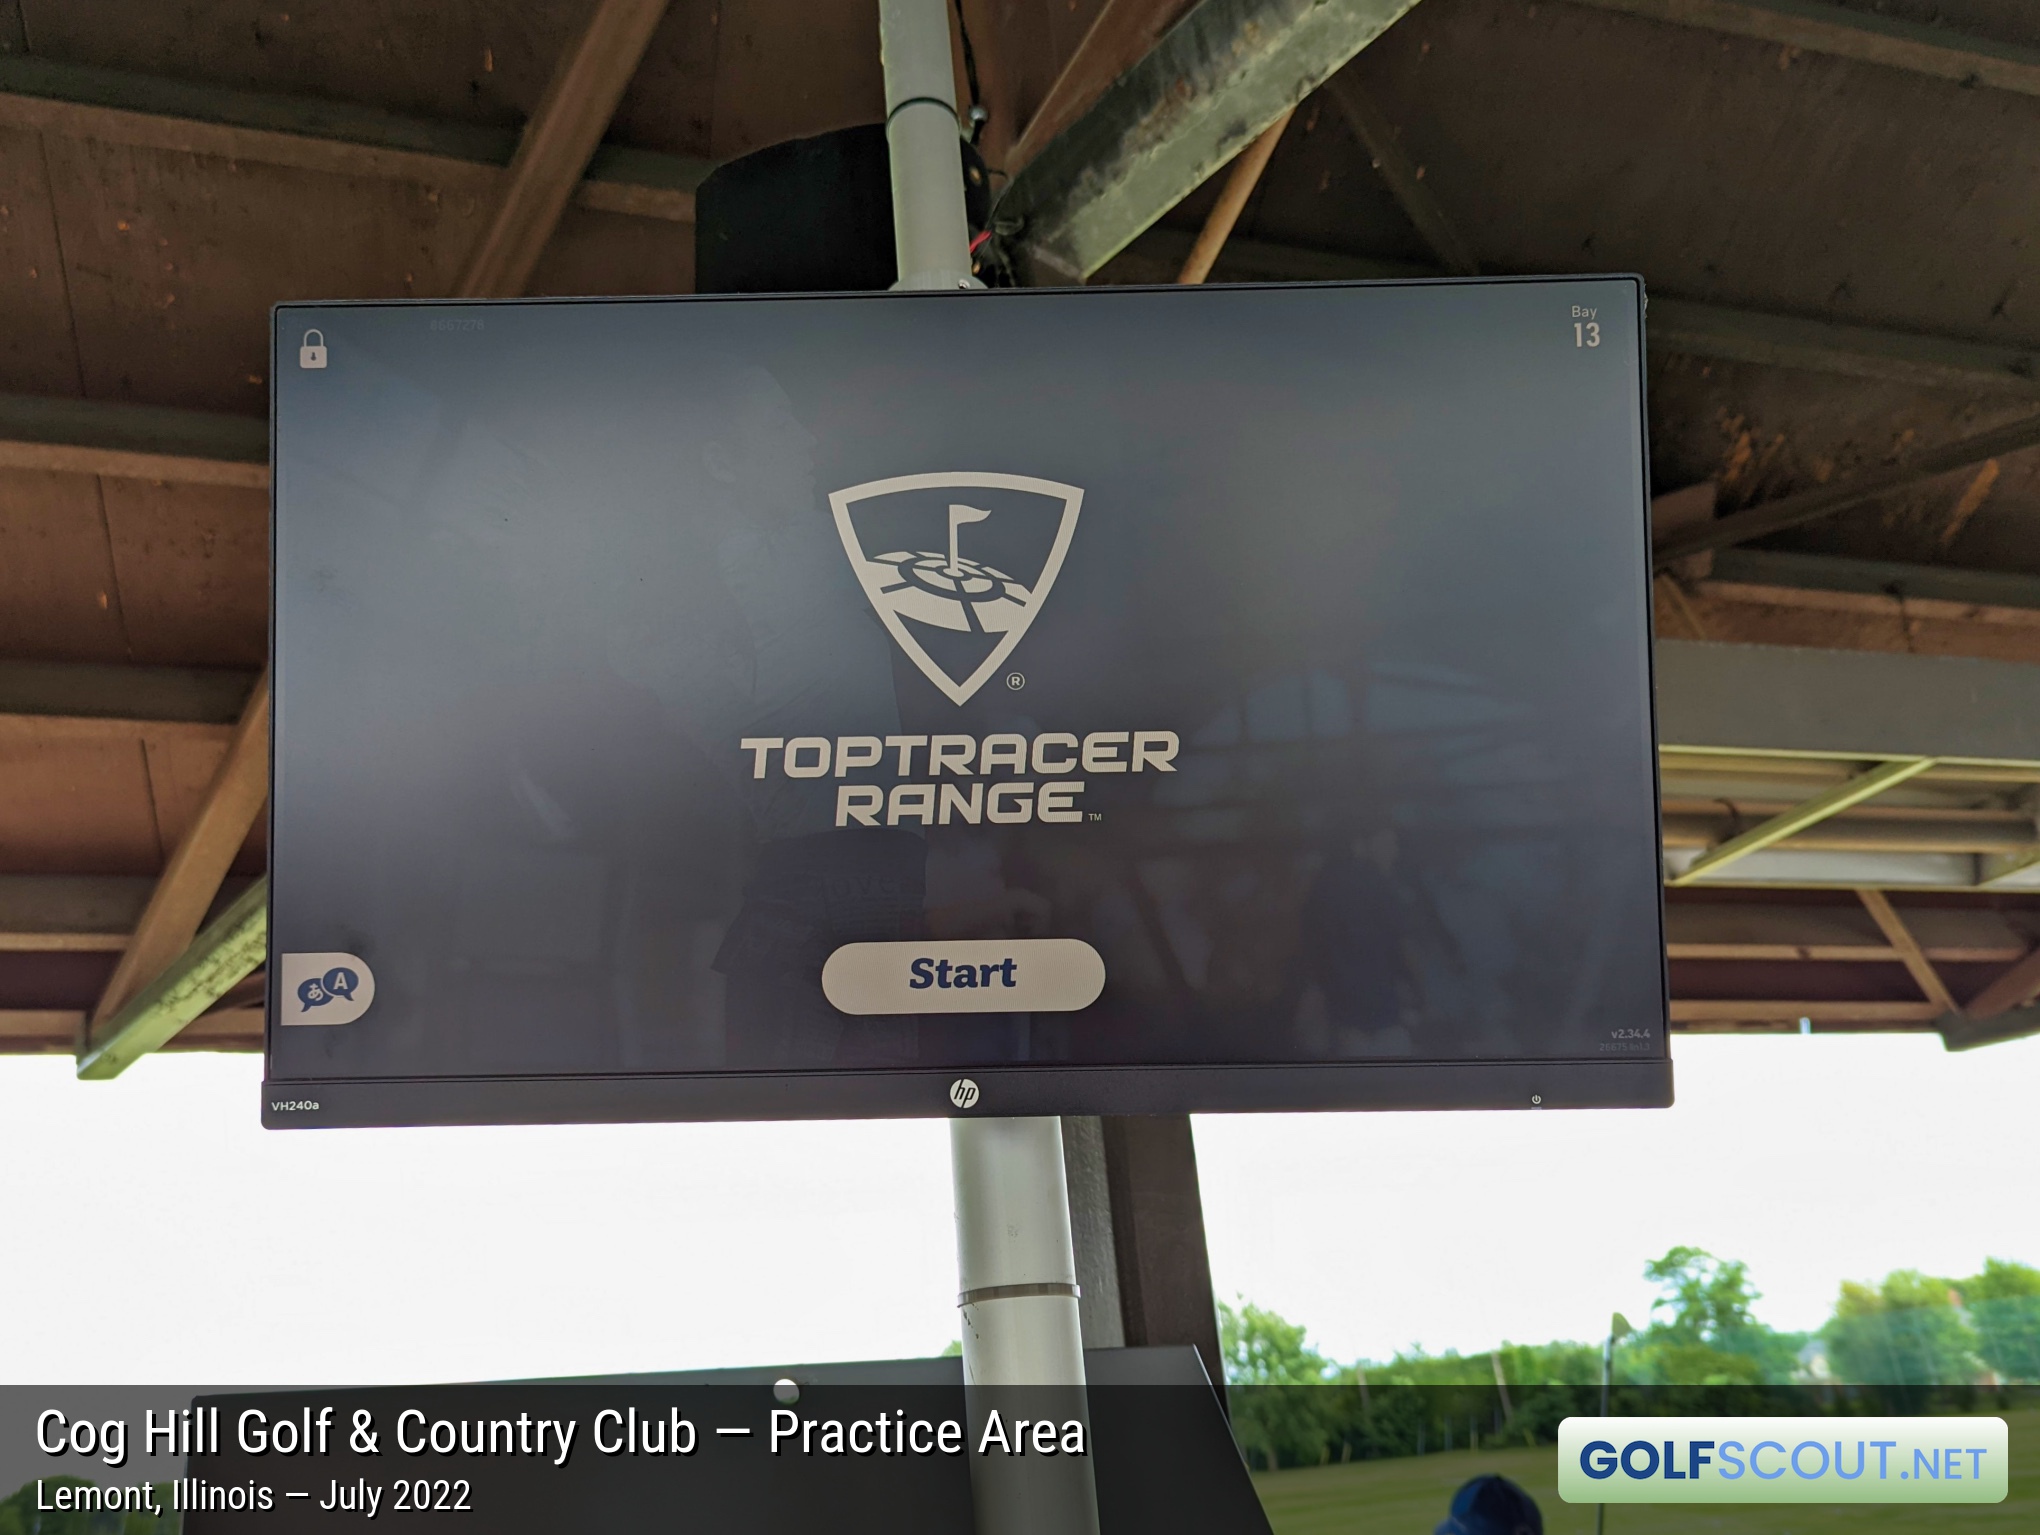 Photo of the practice area at Cog Hill Course #3 in Lemont, Illinois. The driving range has a tracking system called TopTracer, which analyzes your ball flight, just like the pros.